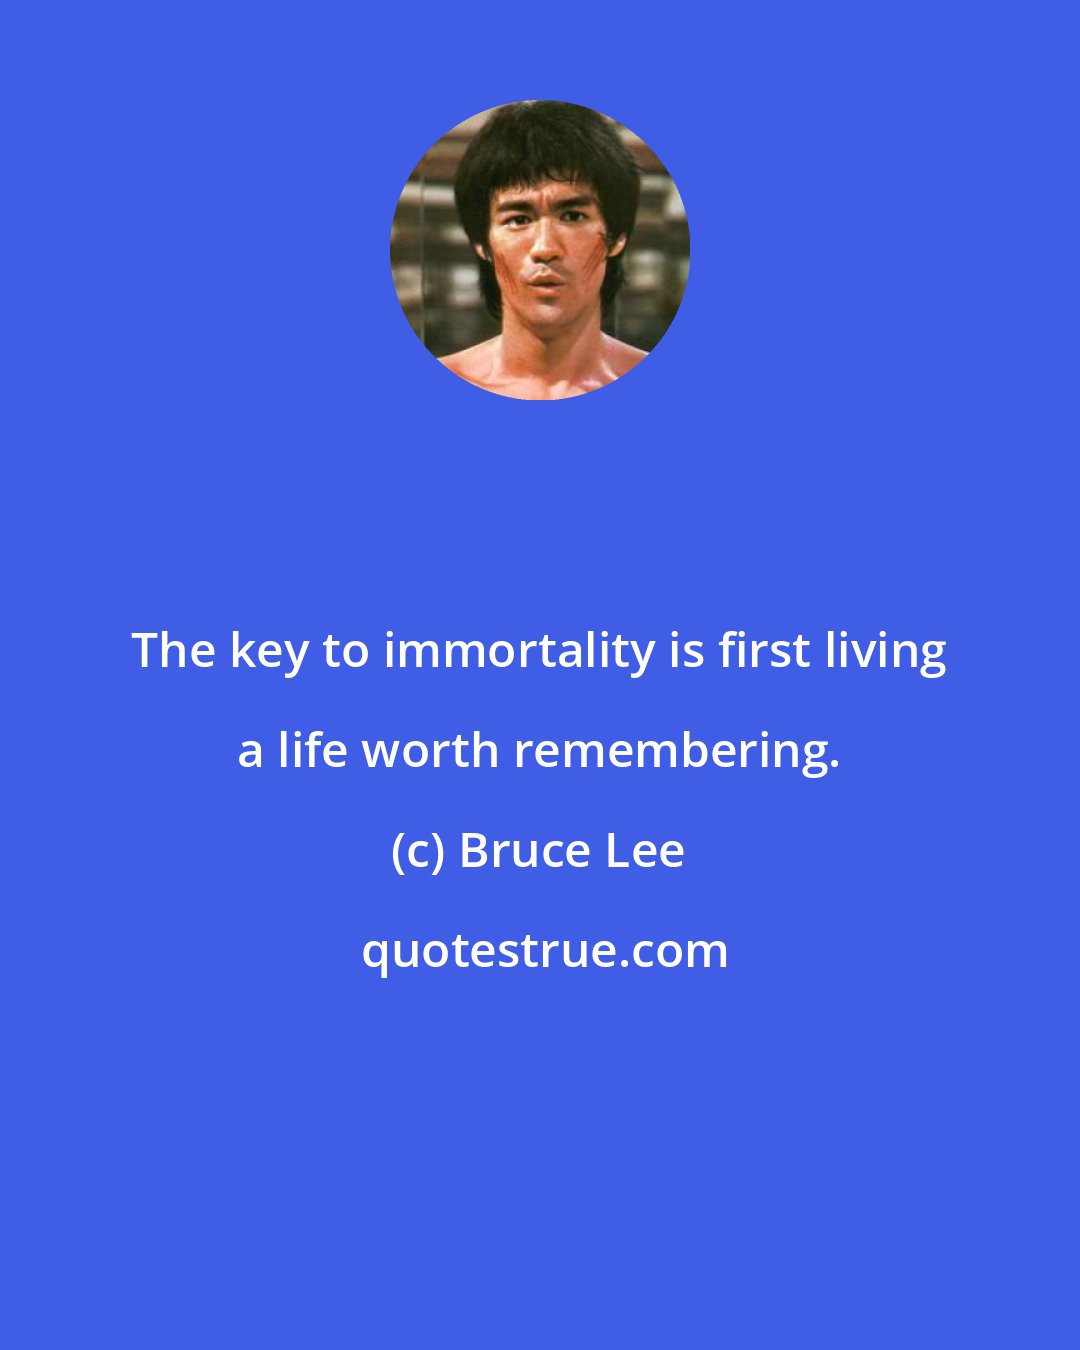 Bruce Lee: The key to immortality is first living a life worth remembering.